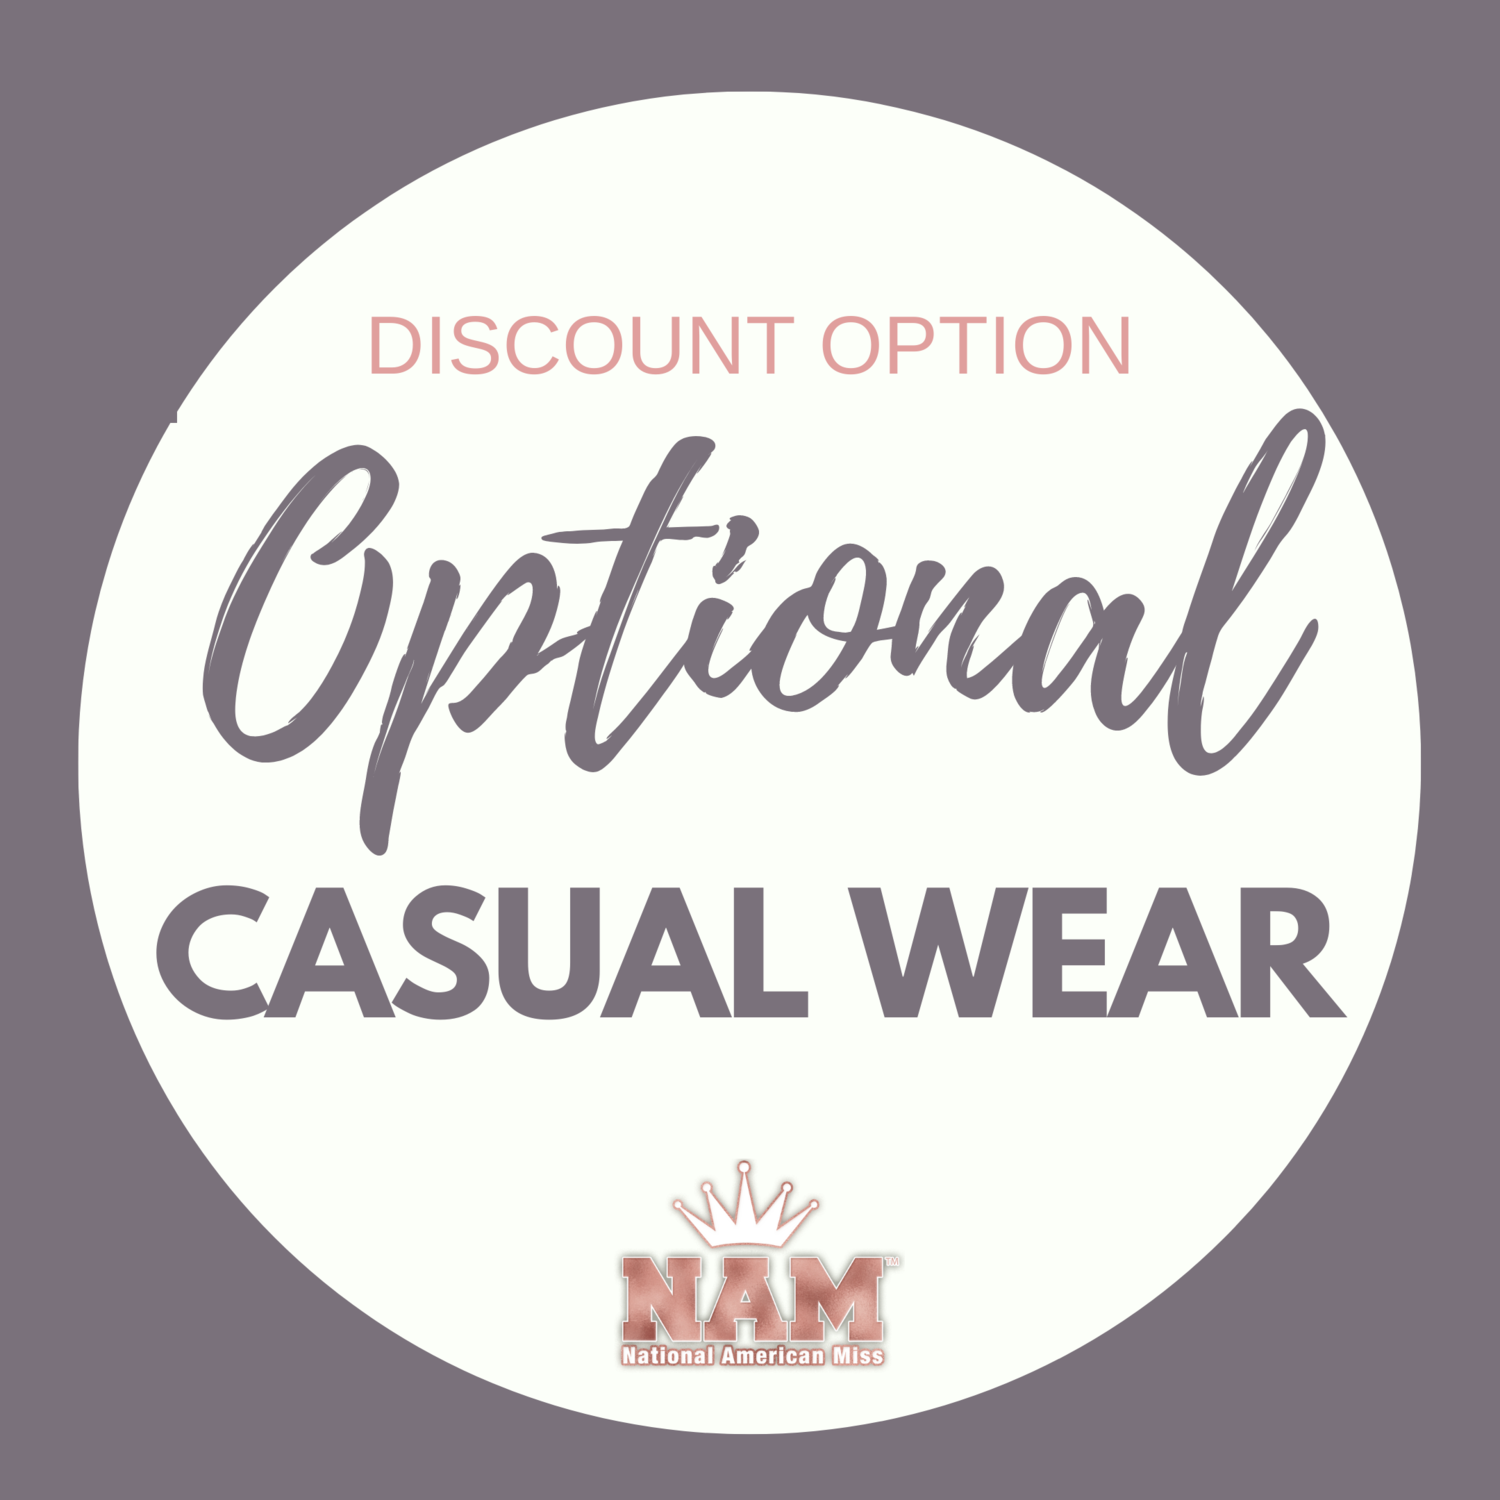 2022 Optional Casual Wear Modeling Contest Discount